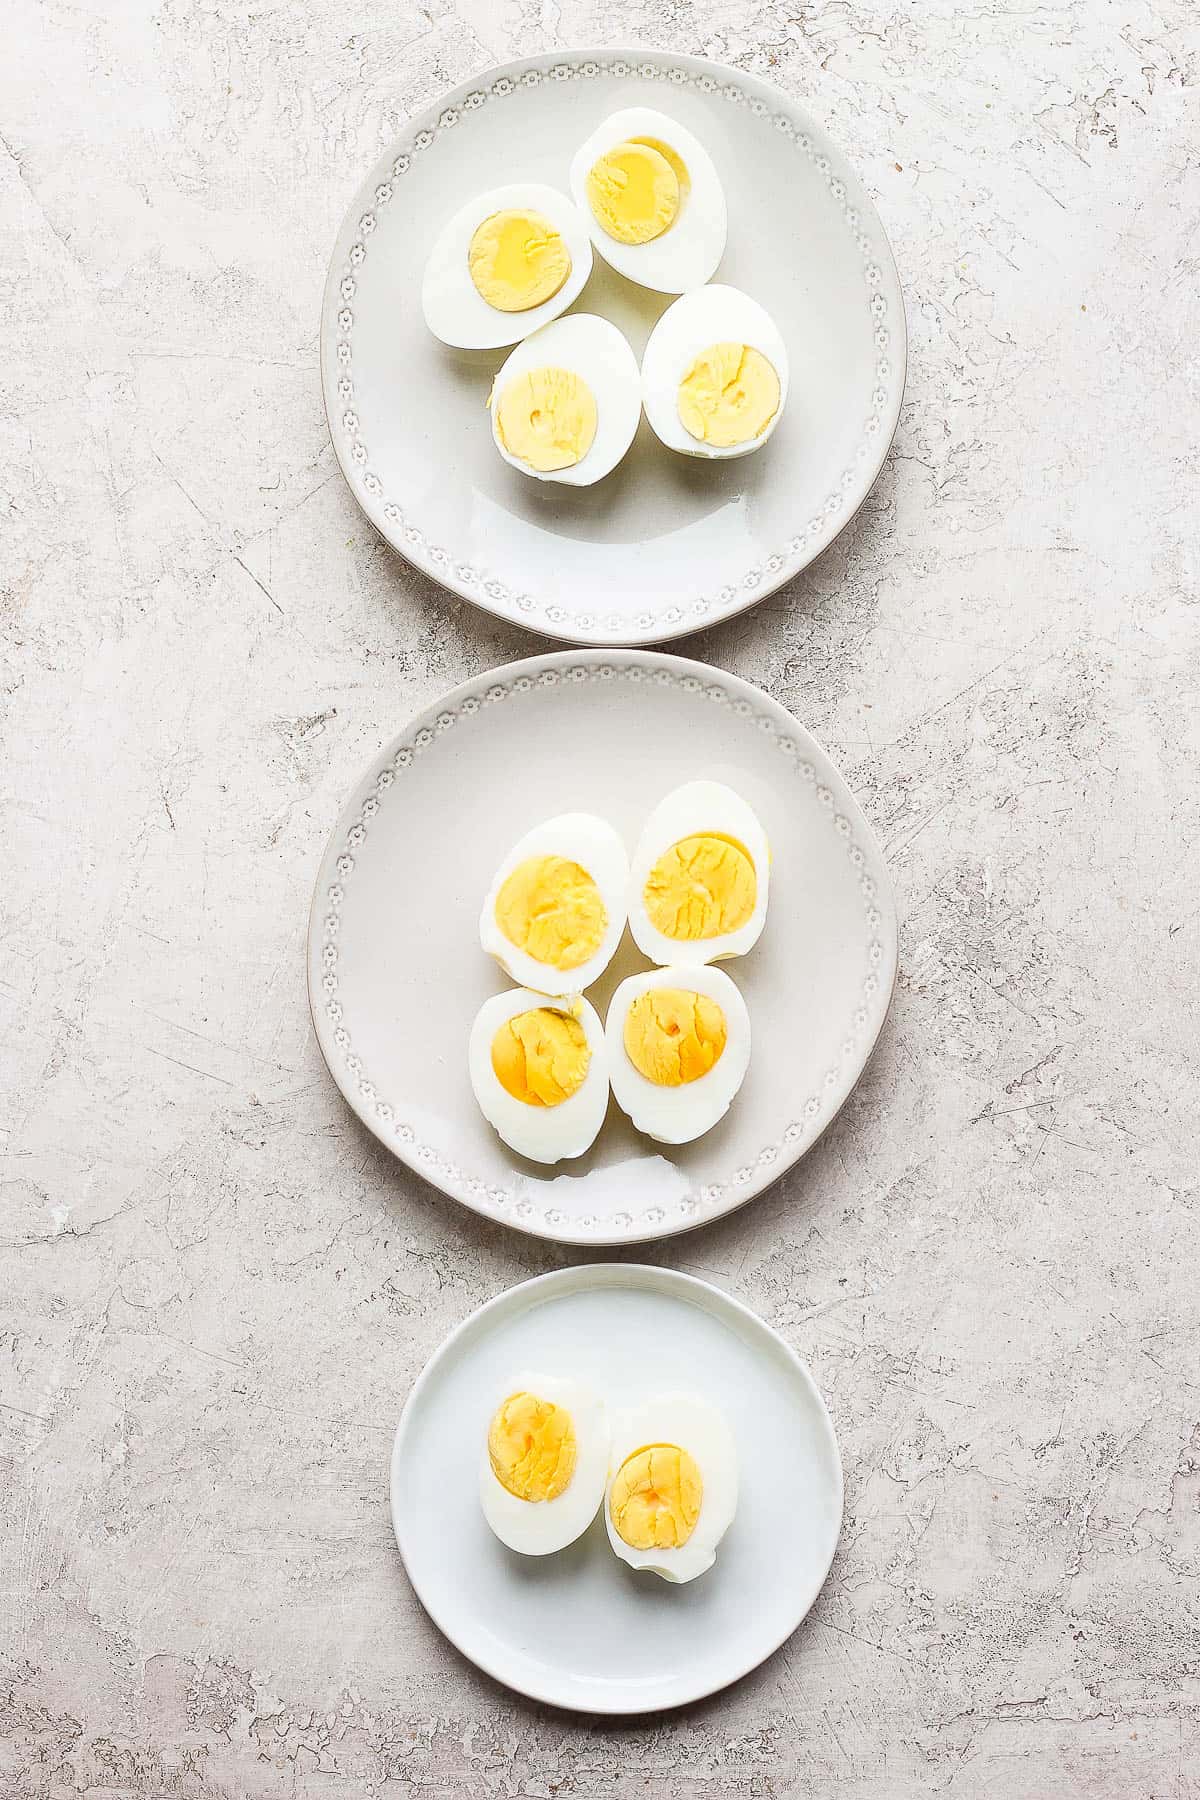 Three plates, each with two sliced hard boiled eggs. 